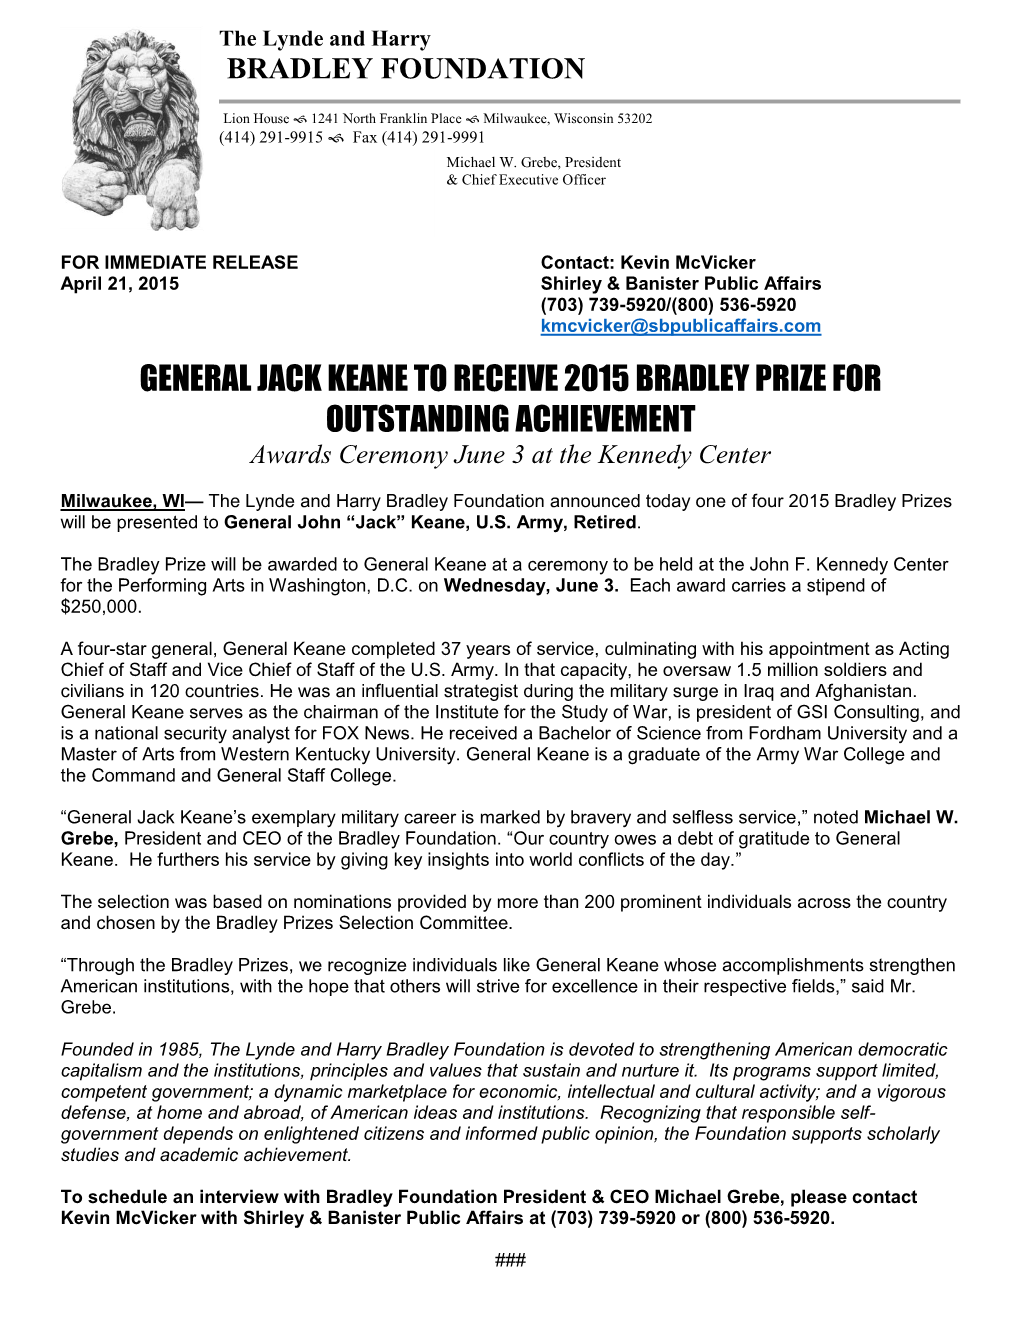 GENERAL JACK KEANE to RECEIVE 2015 BRADLEY PRIZE for OUTSTANDING ACHIEVEMENT Awards Ceremony June 3 at the Kennedy Center